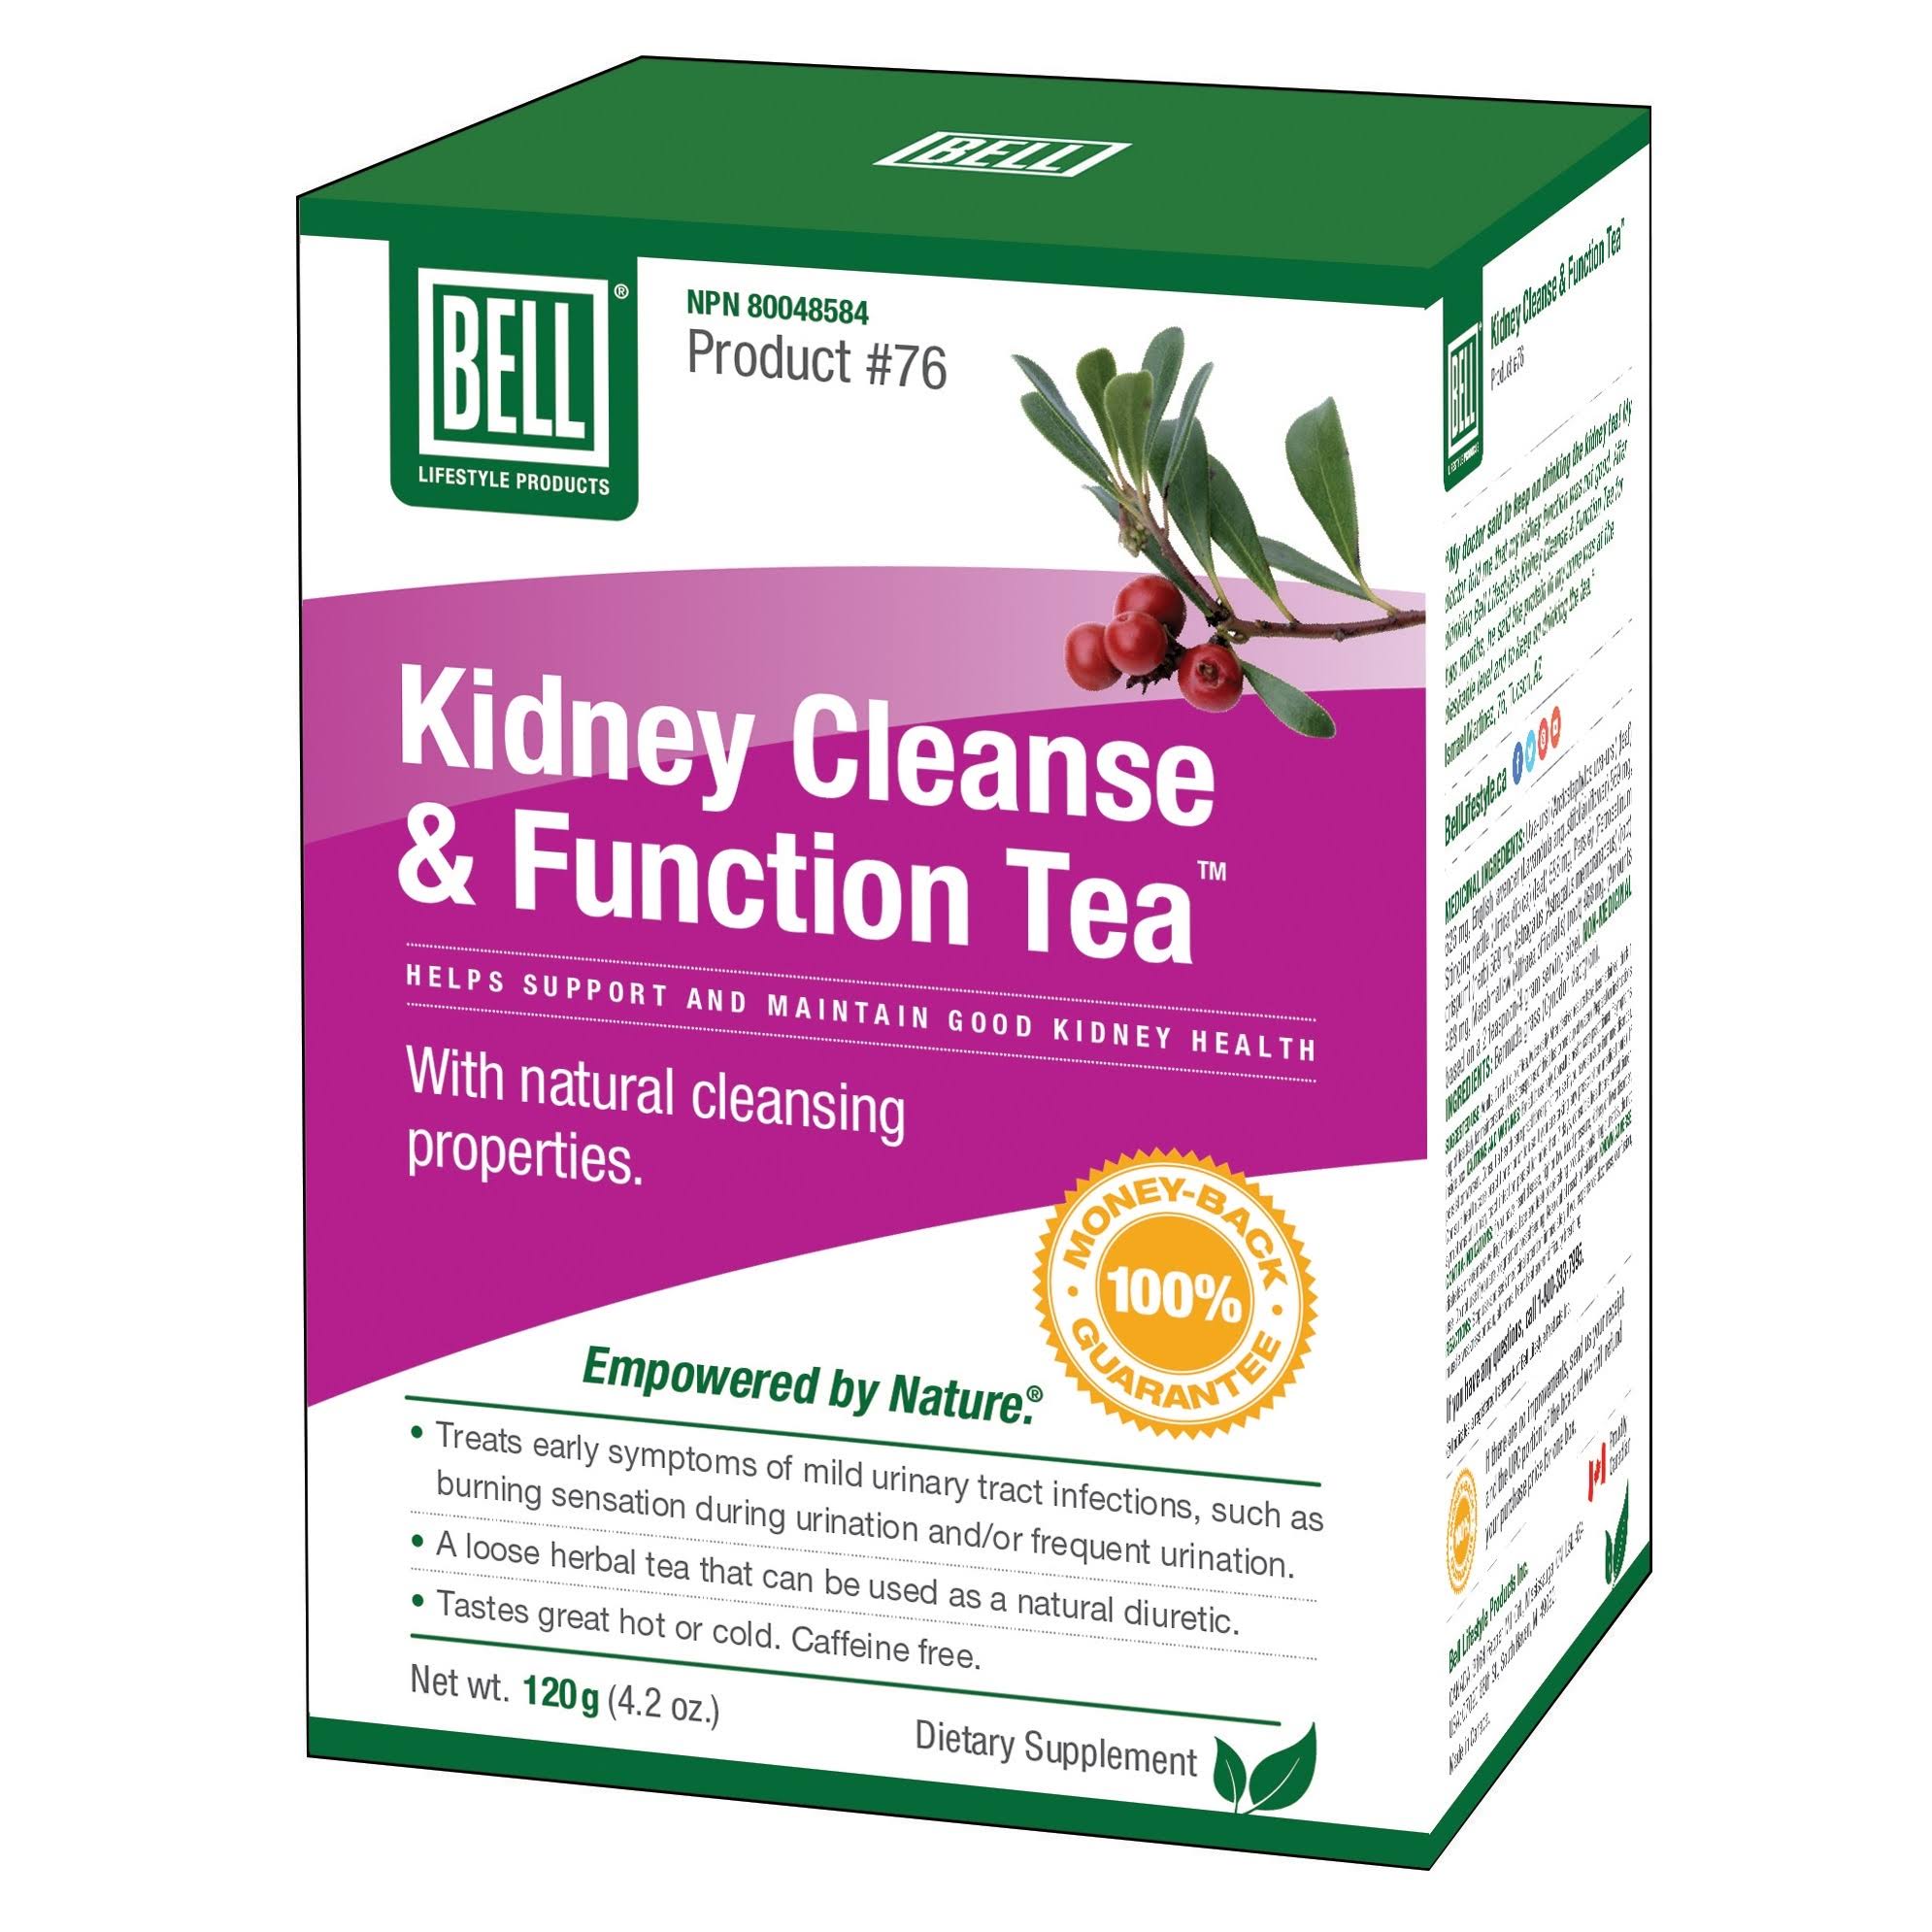 Bell Lifestyle Kidney Cleanse and Function Tea Dietary Supplement - 120g